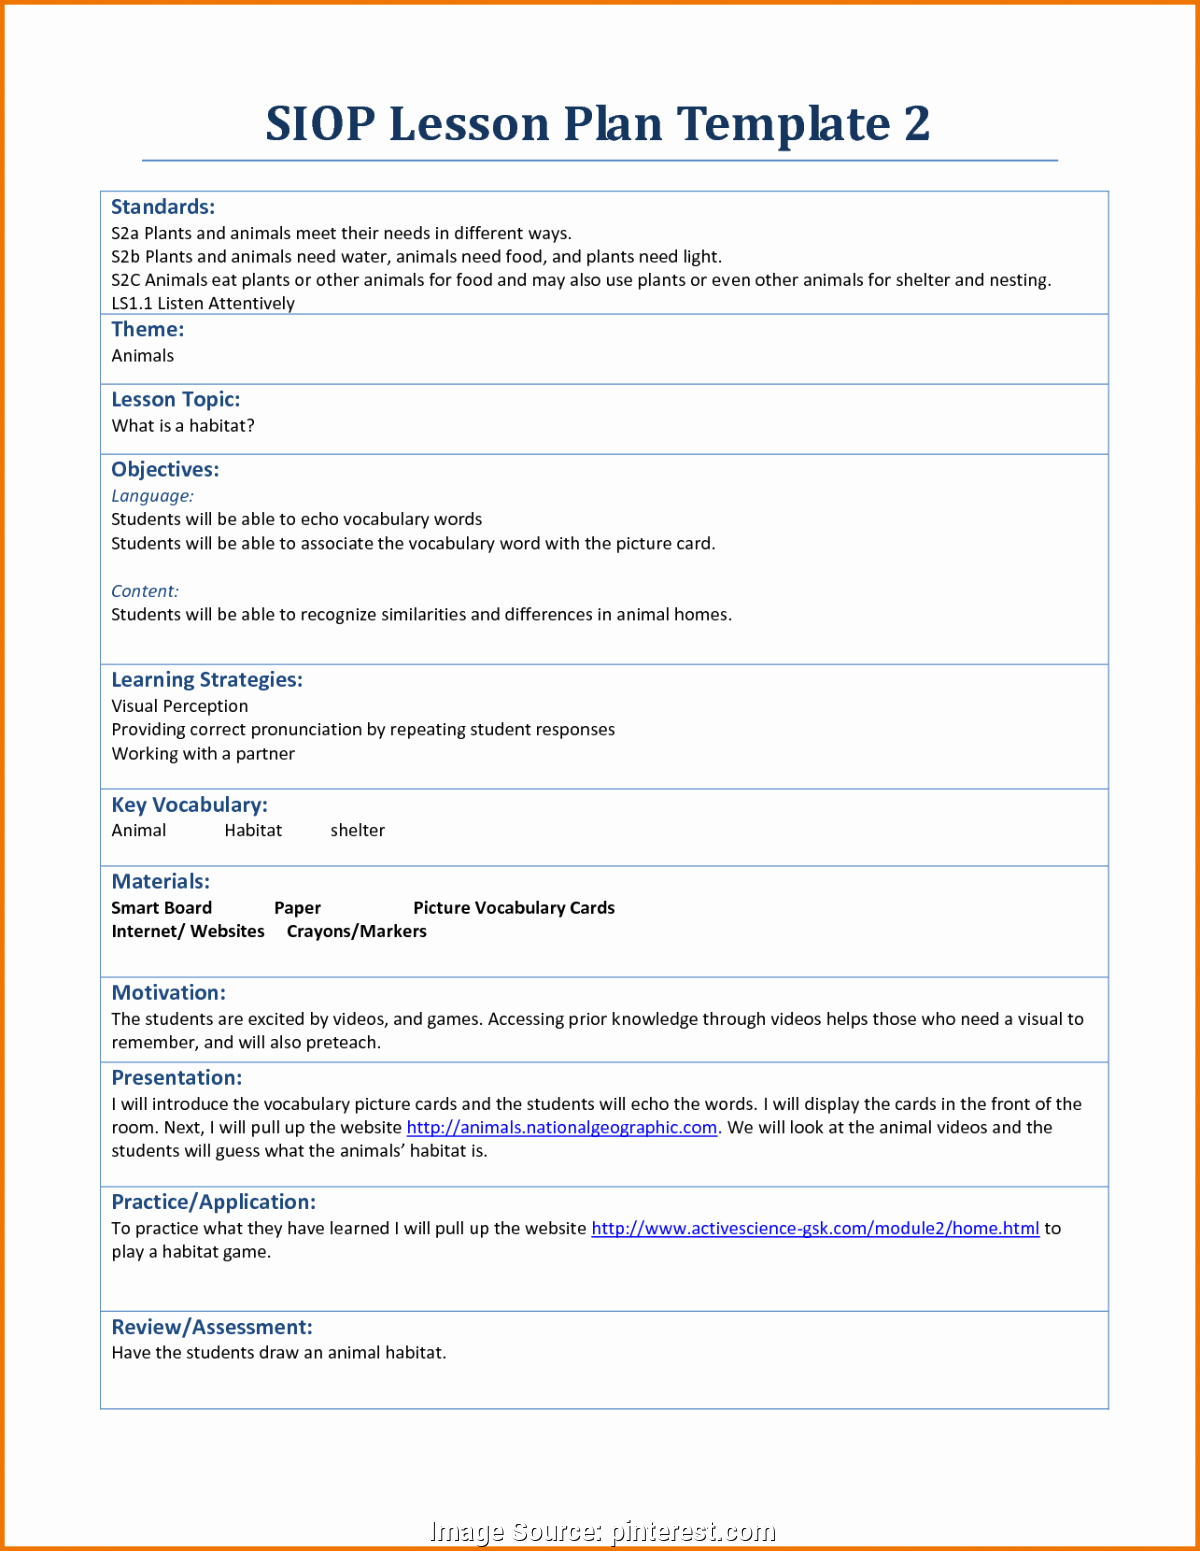 Siop Lesson Plan Template Luxury Siop Lesson Plan Template